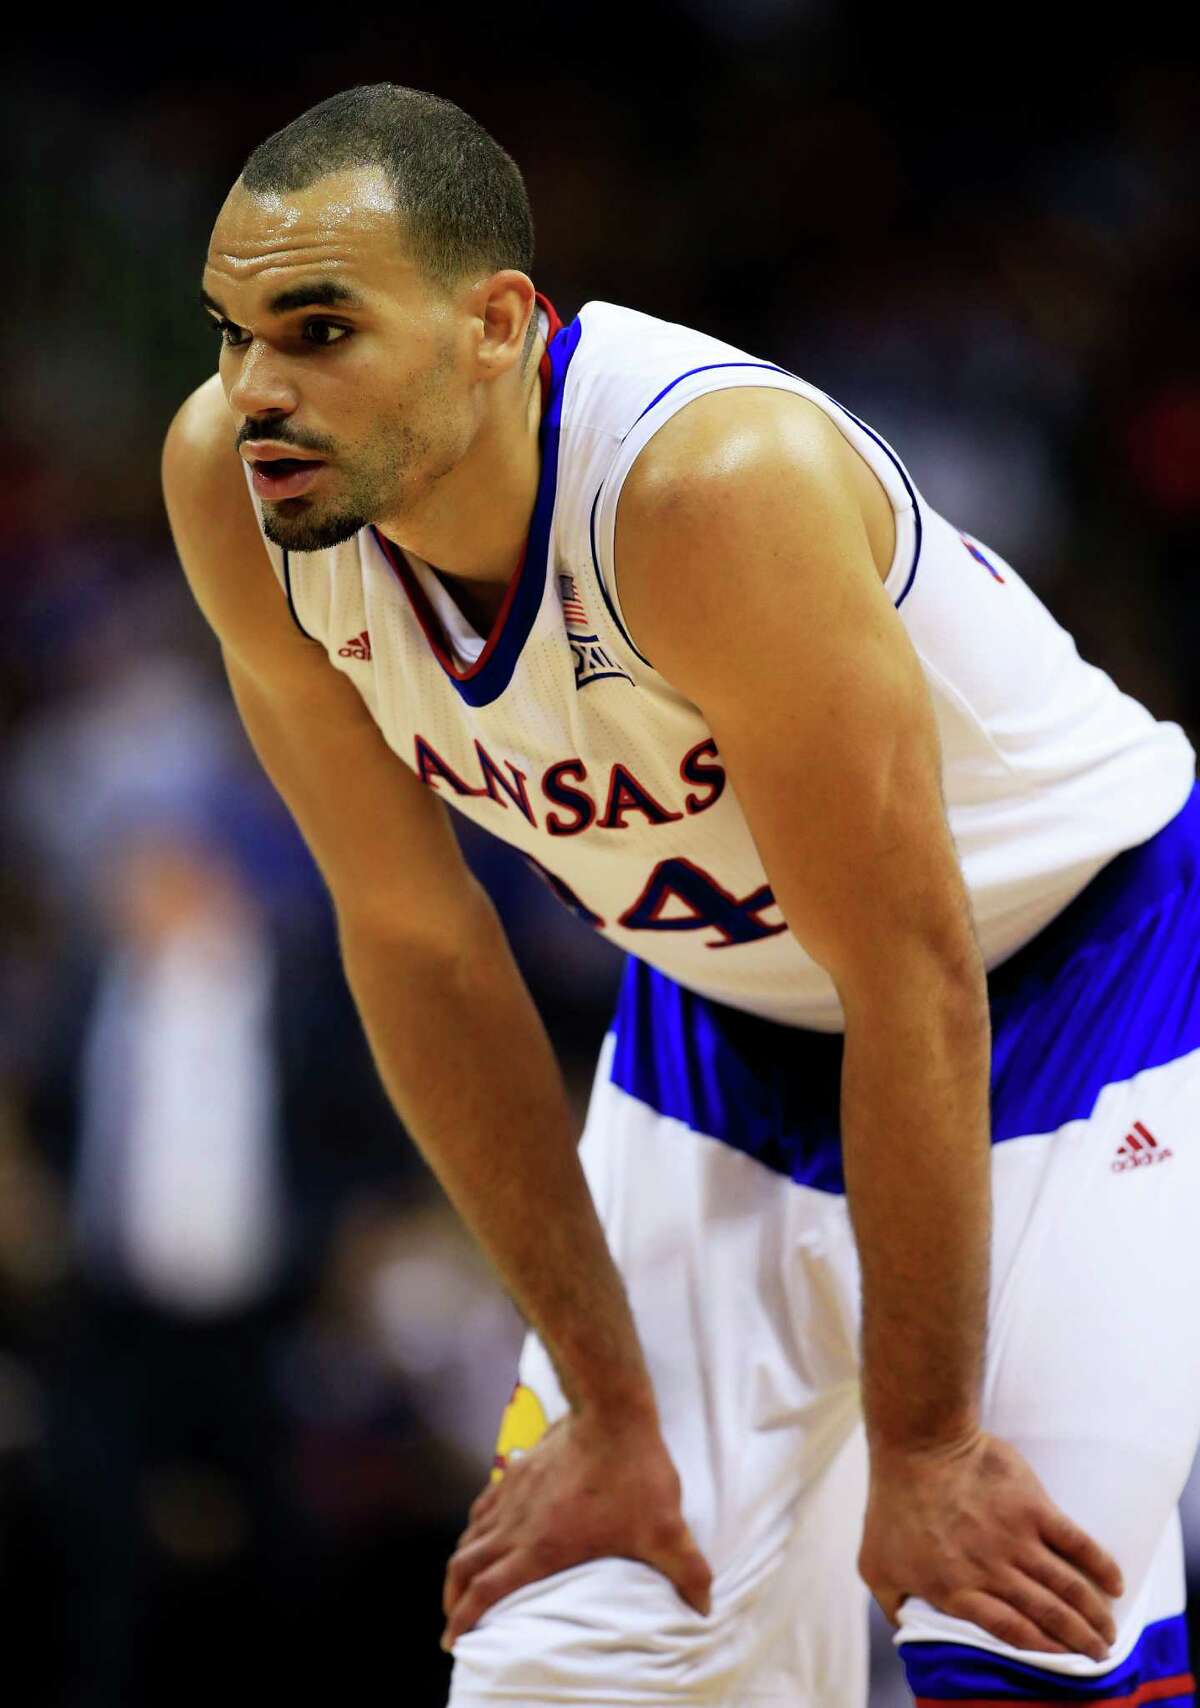 KANSAS CITY, MO - MARCH 13: Perry Ellis #34 of the Kansas Jayhawks looks on against the Baylor Bears in the first half during a semifinal game of the 2015 Big 12 Basketball Tournament at Sprint Center on March 13, 2015 in Kansas City, Missouri. (Photo by Jamie Squire/Getty Images)